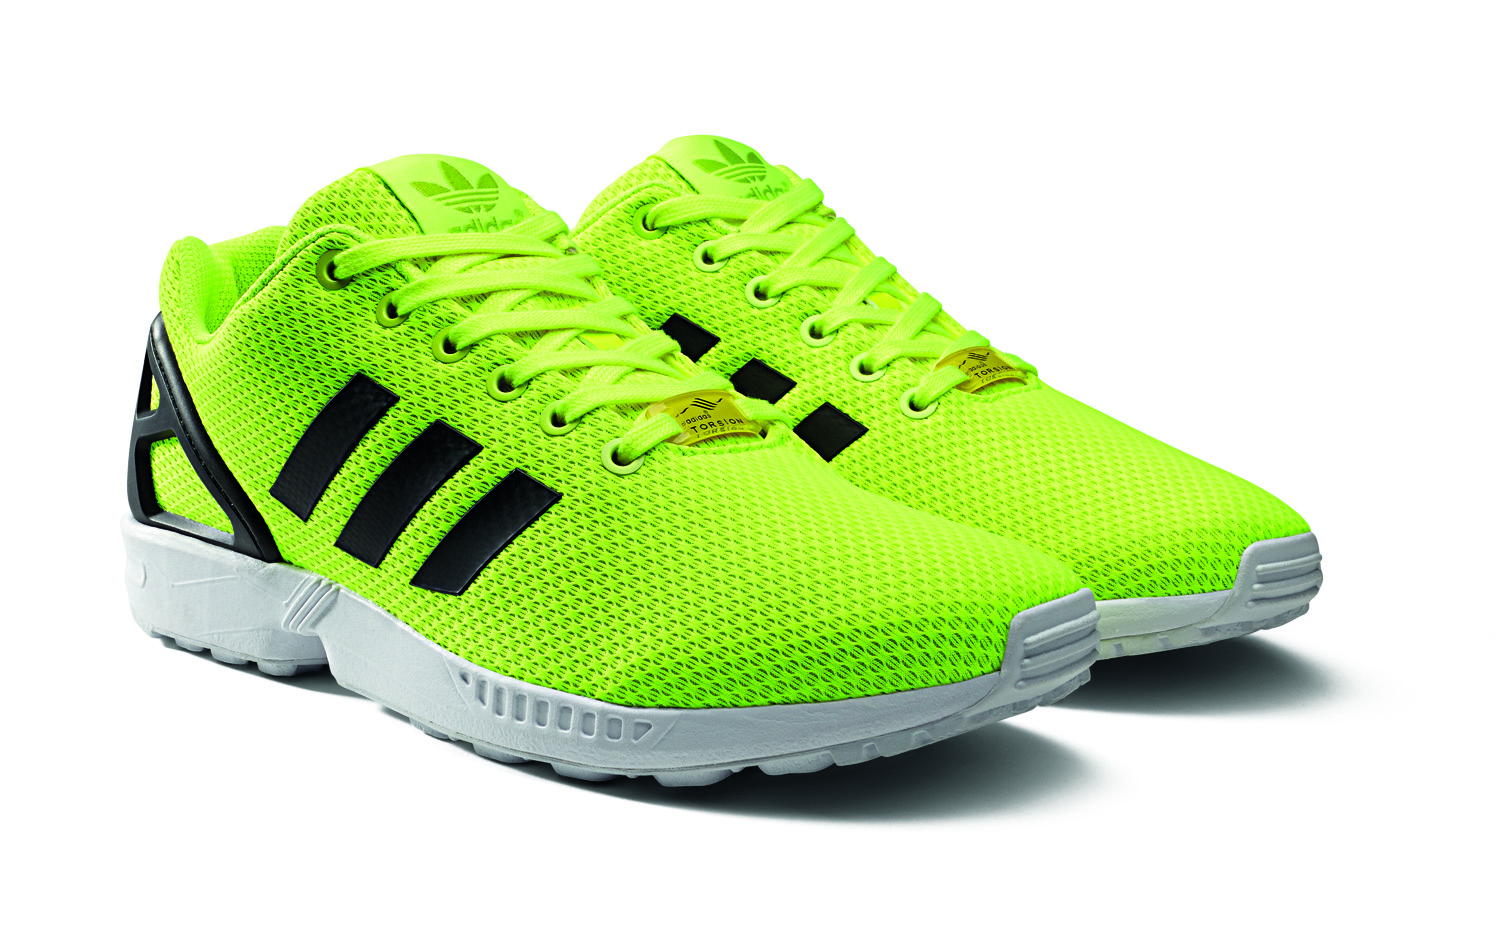 adidas ZX FLUX Base Pack 15